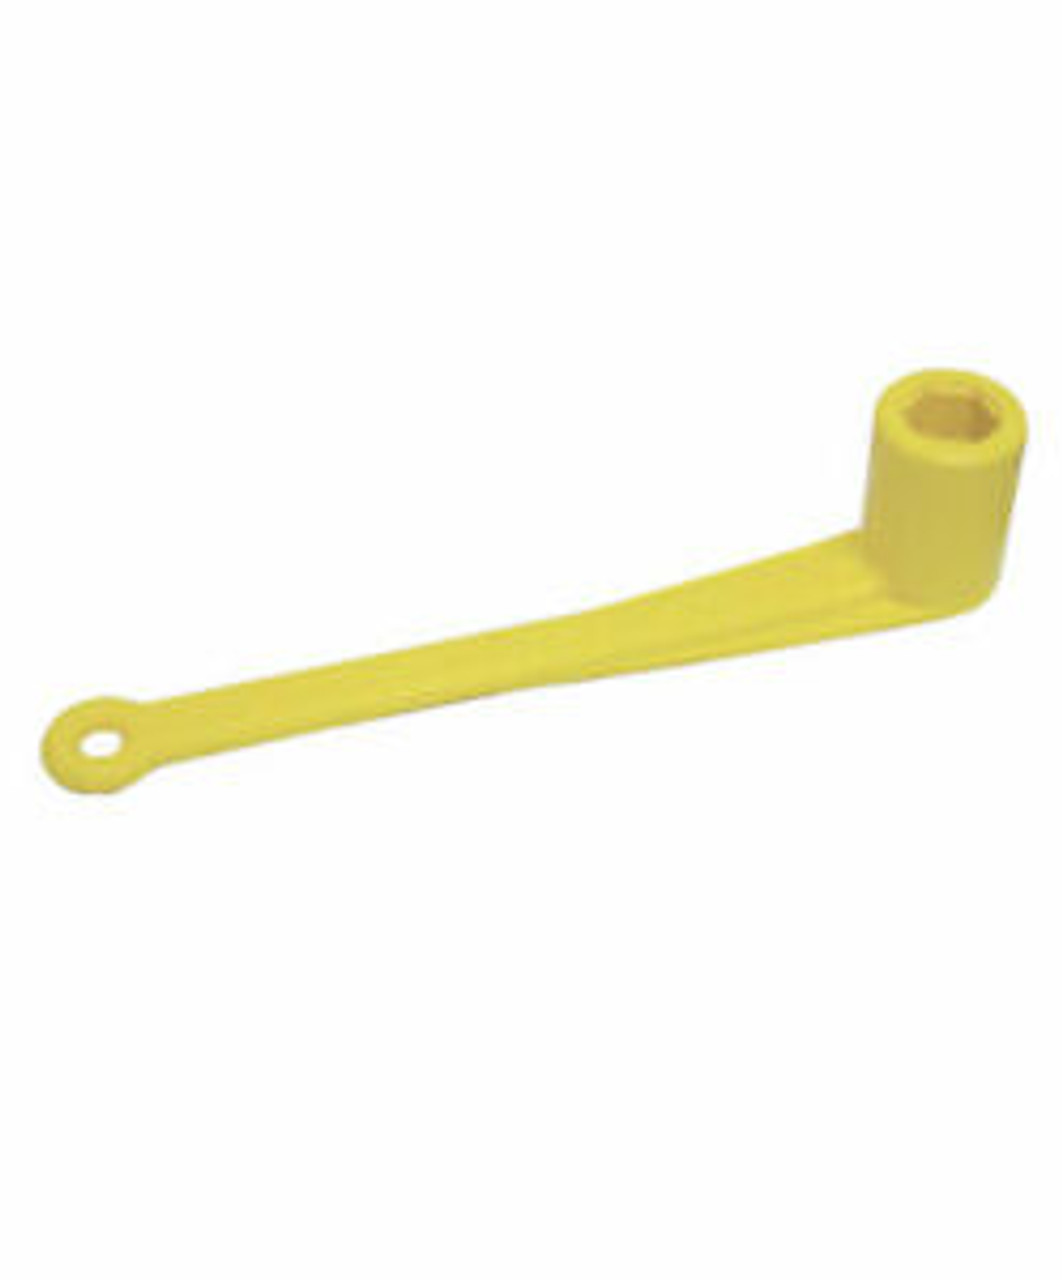 Prop Wrench 18-4459